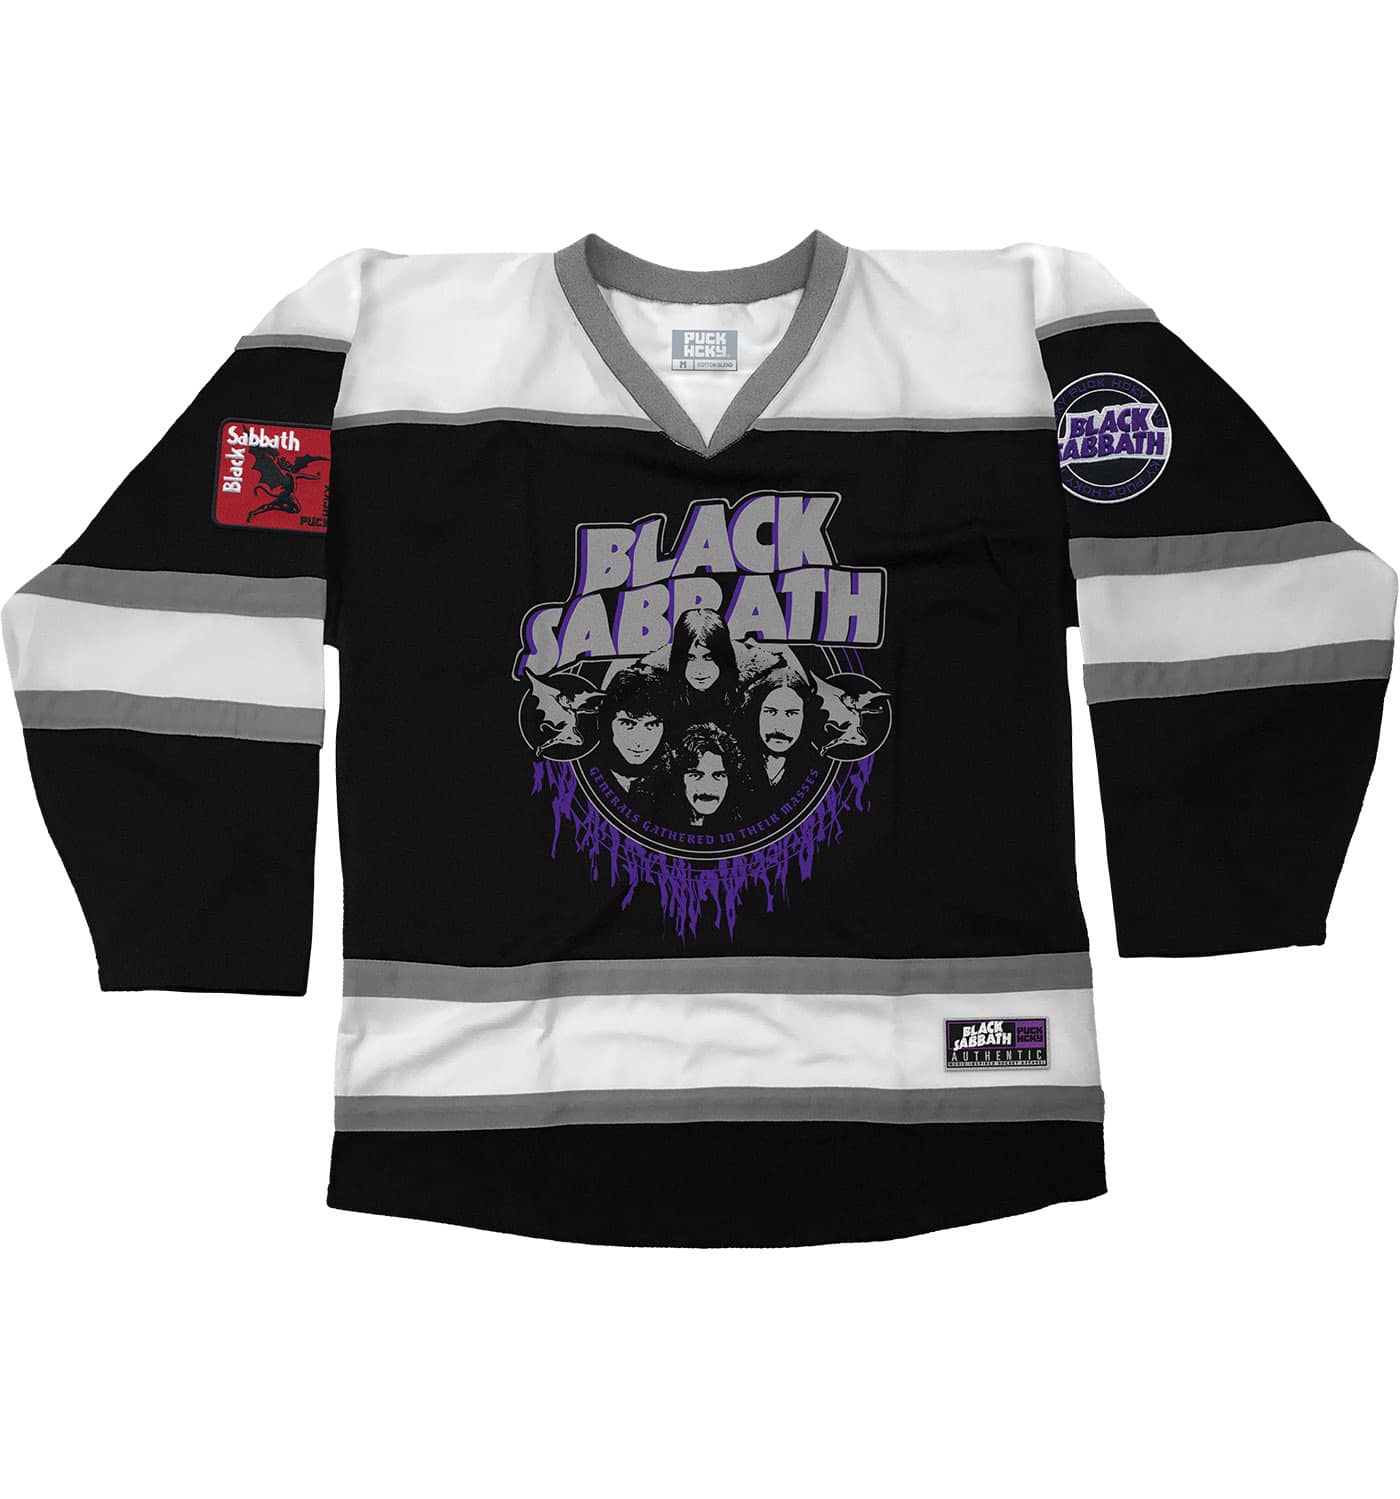 COMING TO CHICAGO (COMING TO AMERICA) TRIBUTE HOCKEY JERSEY XXL